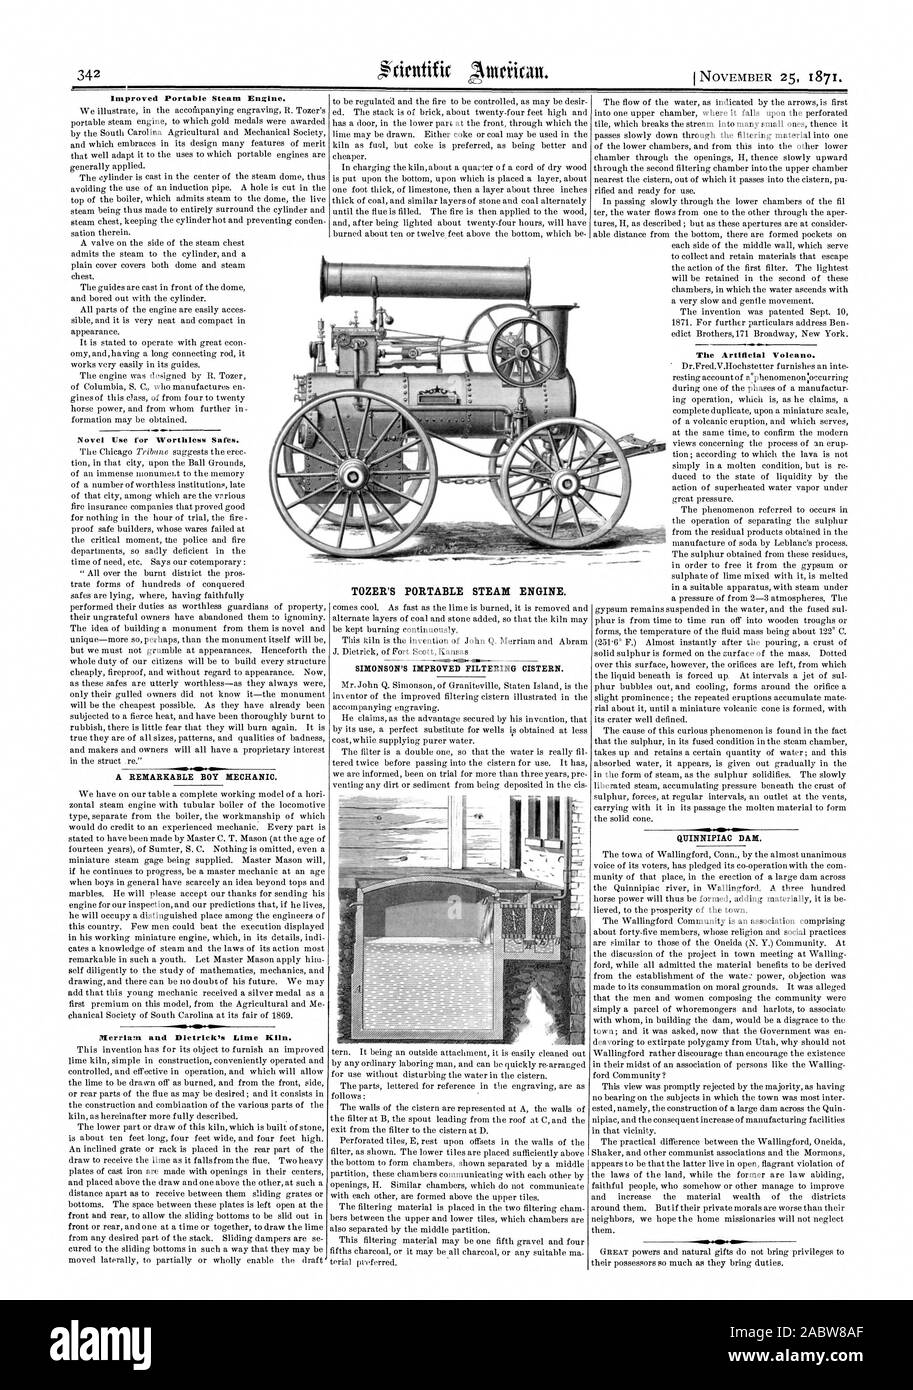 Improved Portable Steam Engine. Novel Use for Worthless Safes. A REMARKABLE BOY MECHANIC. 1Kerrialn and Dietrick's Lime Kiln. TOZER'S PORTABLE STEAM ENGINE. SIMONSON'S IMPROVED FILTERING CISTERN. The Artificial Volcano., scientific american, 1871-11-25 Stock Photo